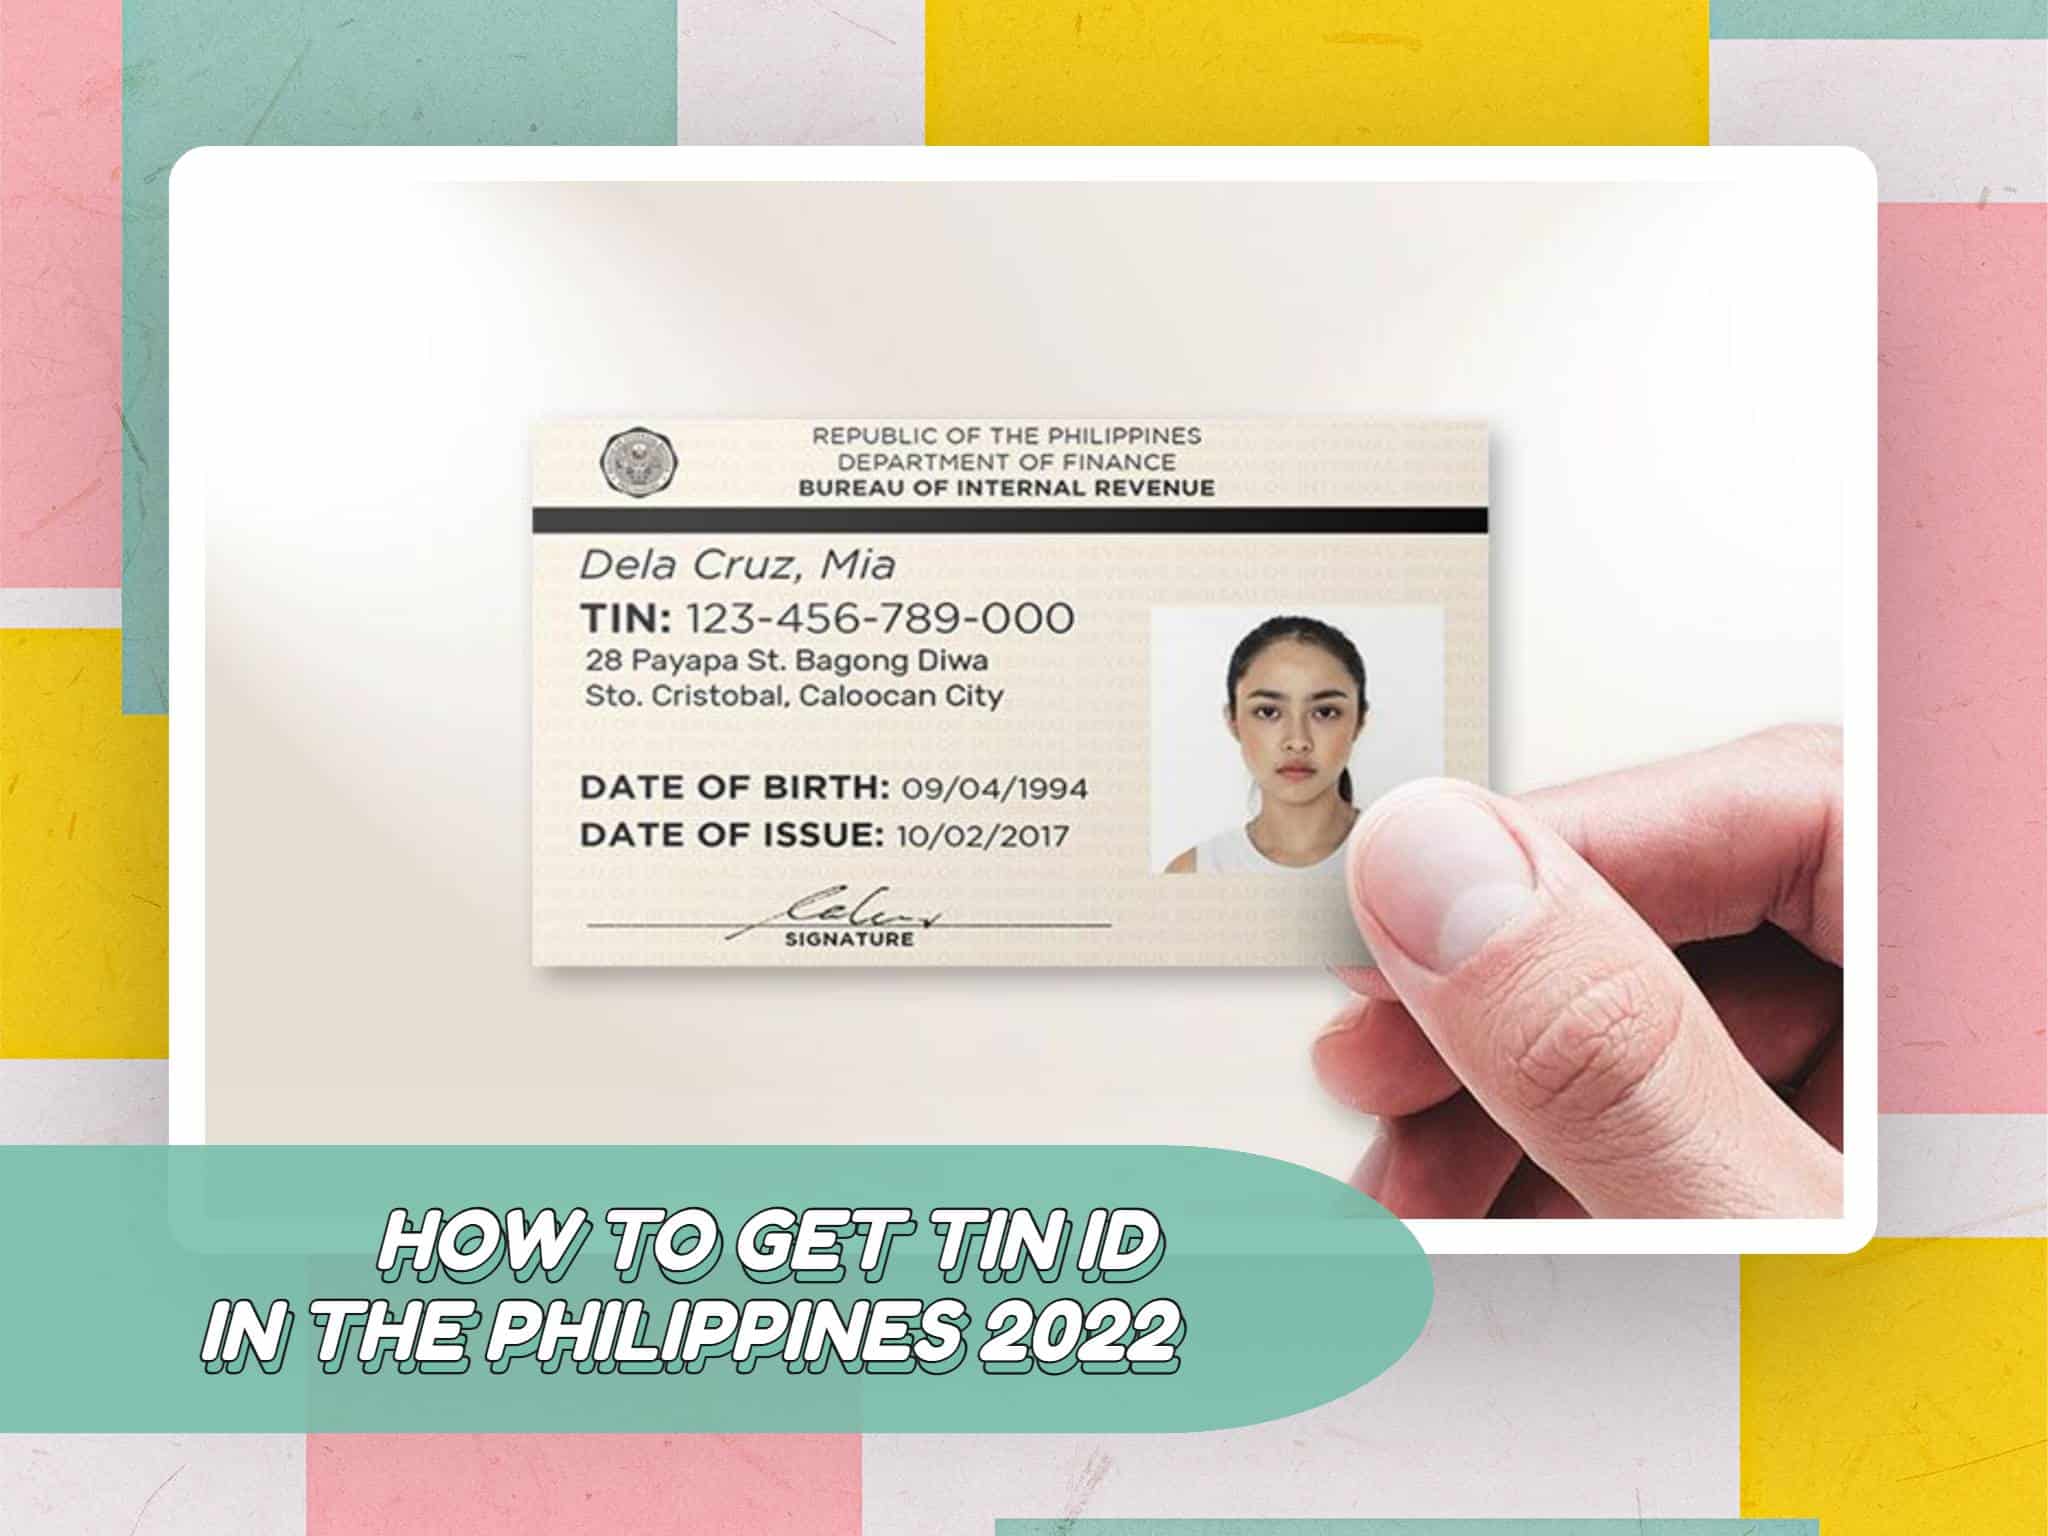 How to Get a TIN ID in the Philippines?